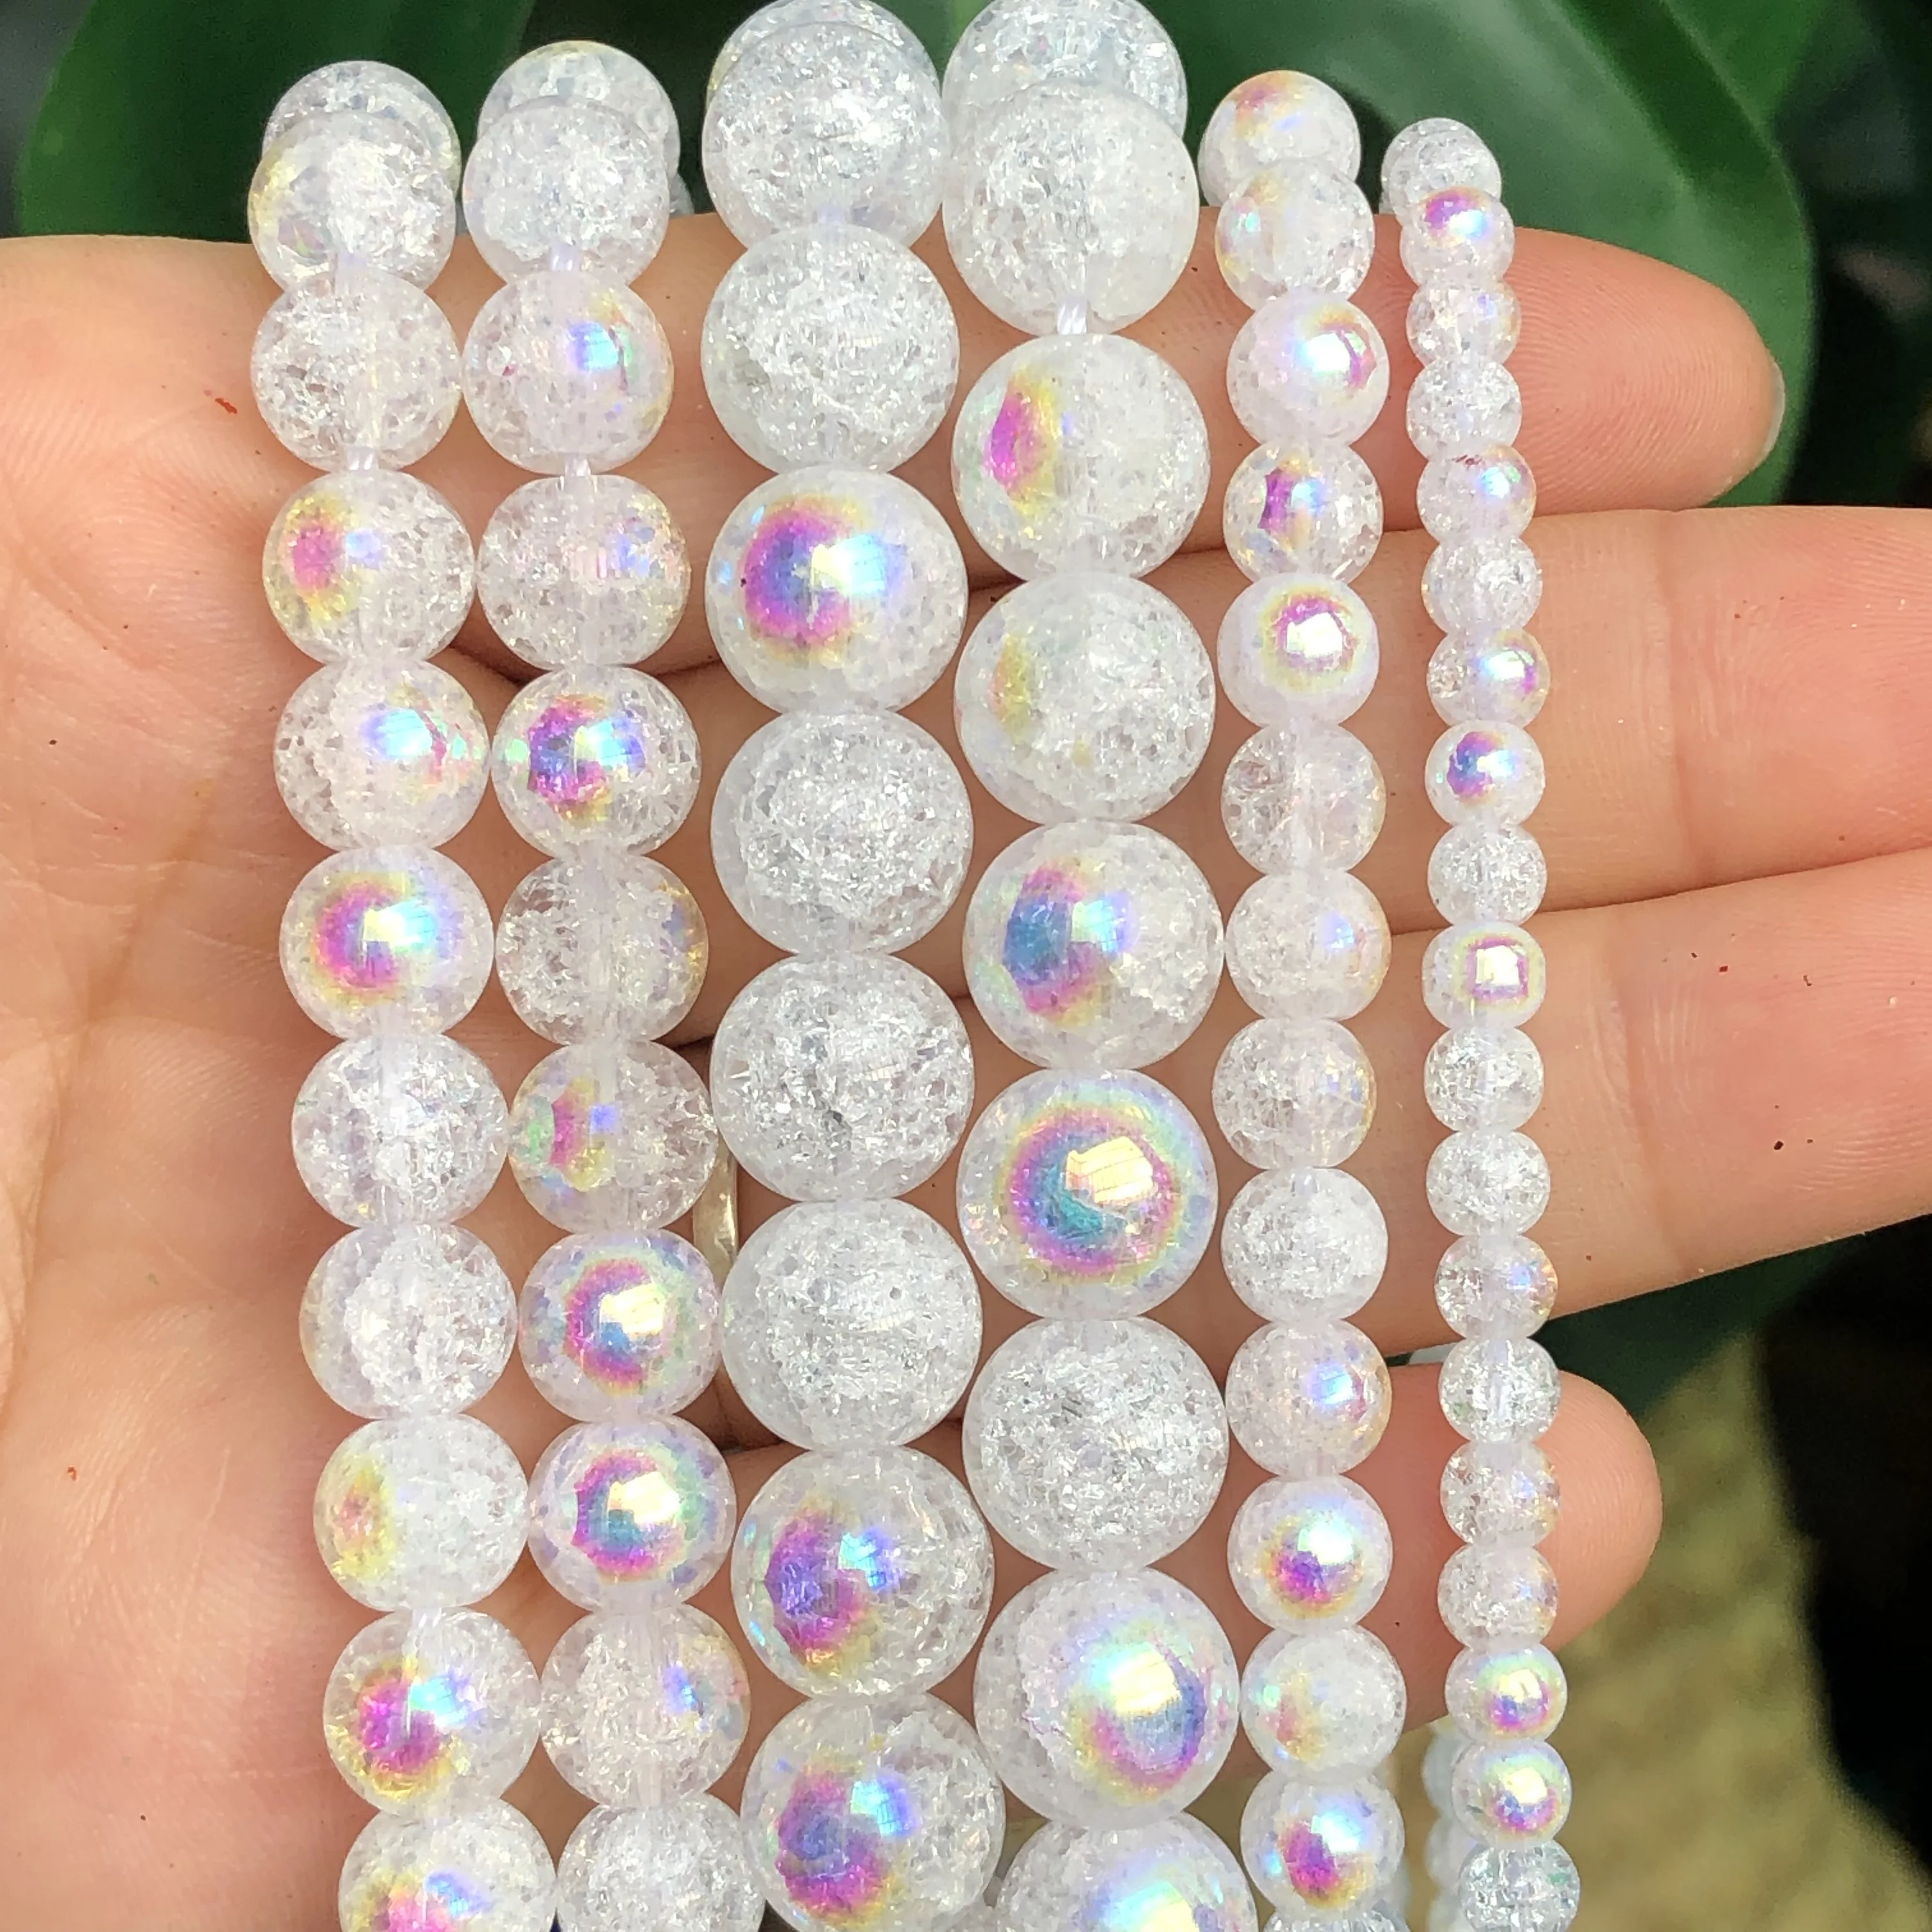 

Natural Stone AB White Snow Cracked Quartz Crystal Beads For Jewelry Making Diy Bracelet Necklace 15Inch 4 6 8 10 12mm Pick Size